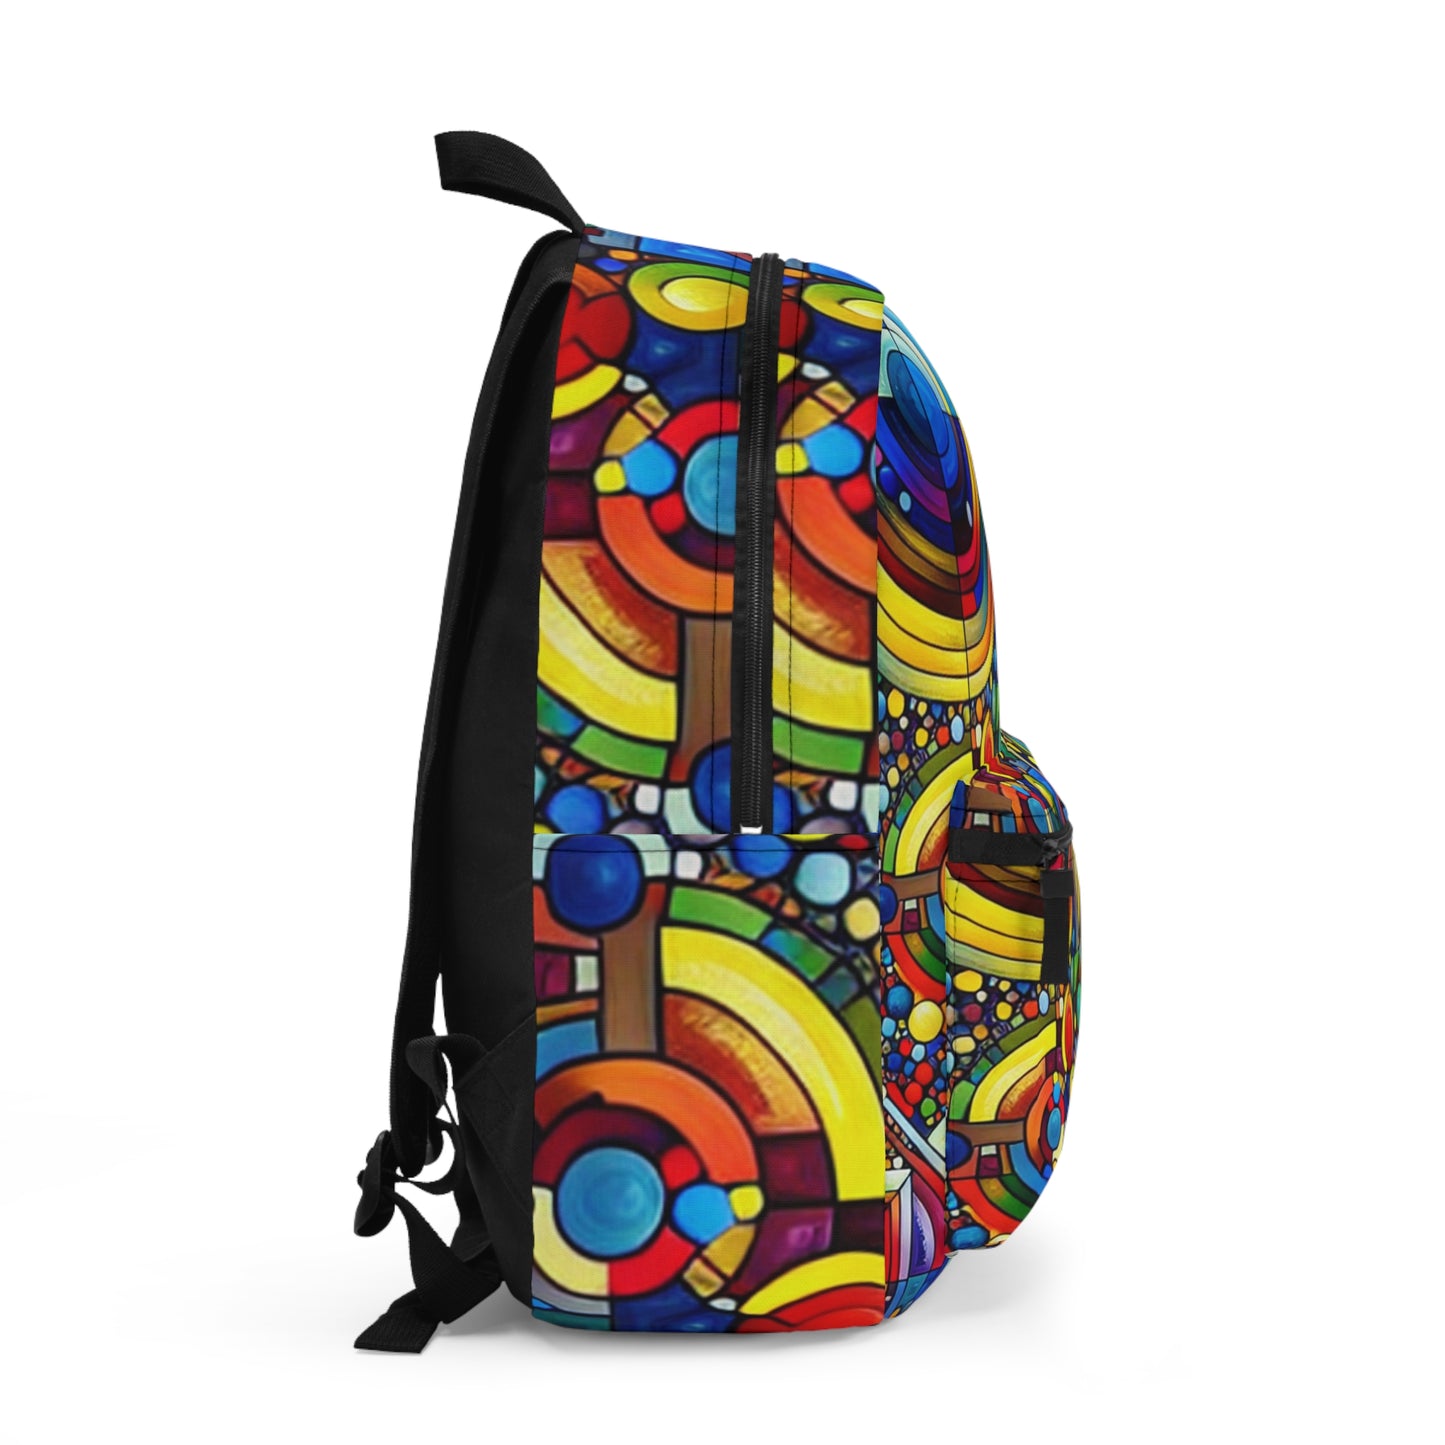 Annelise Fontaineau - Backpack